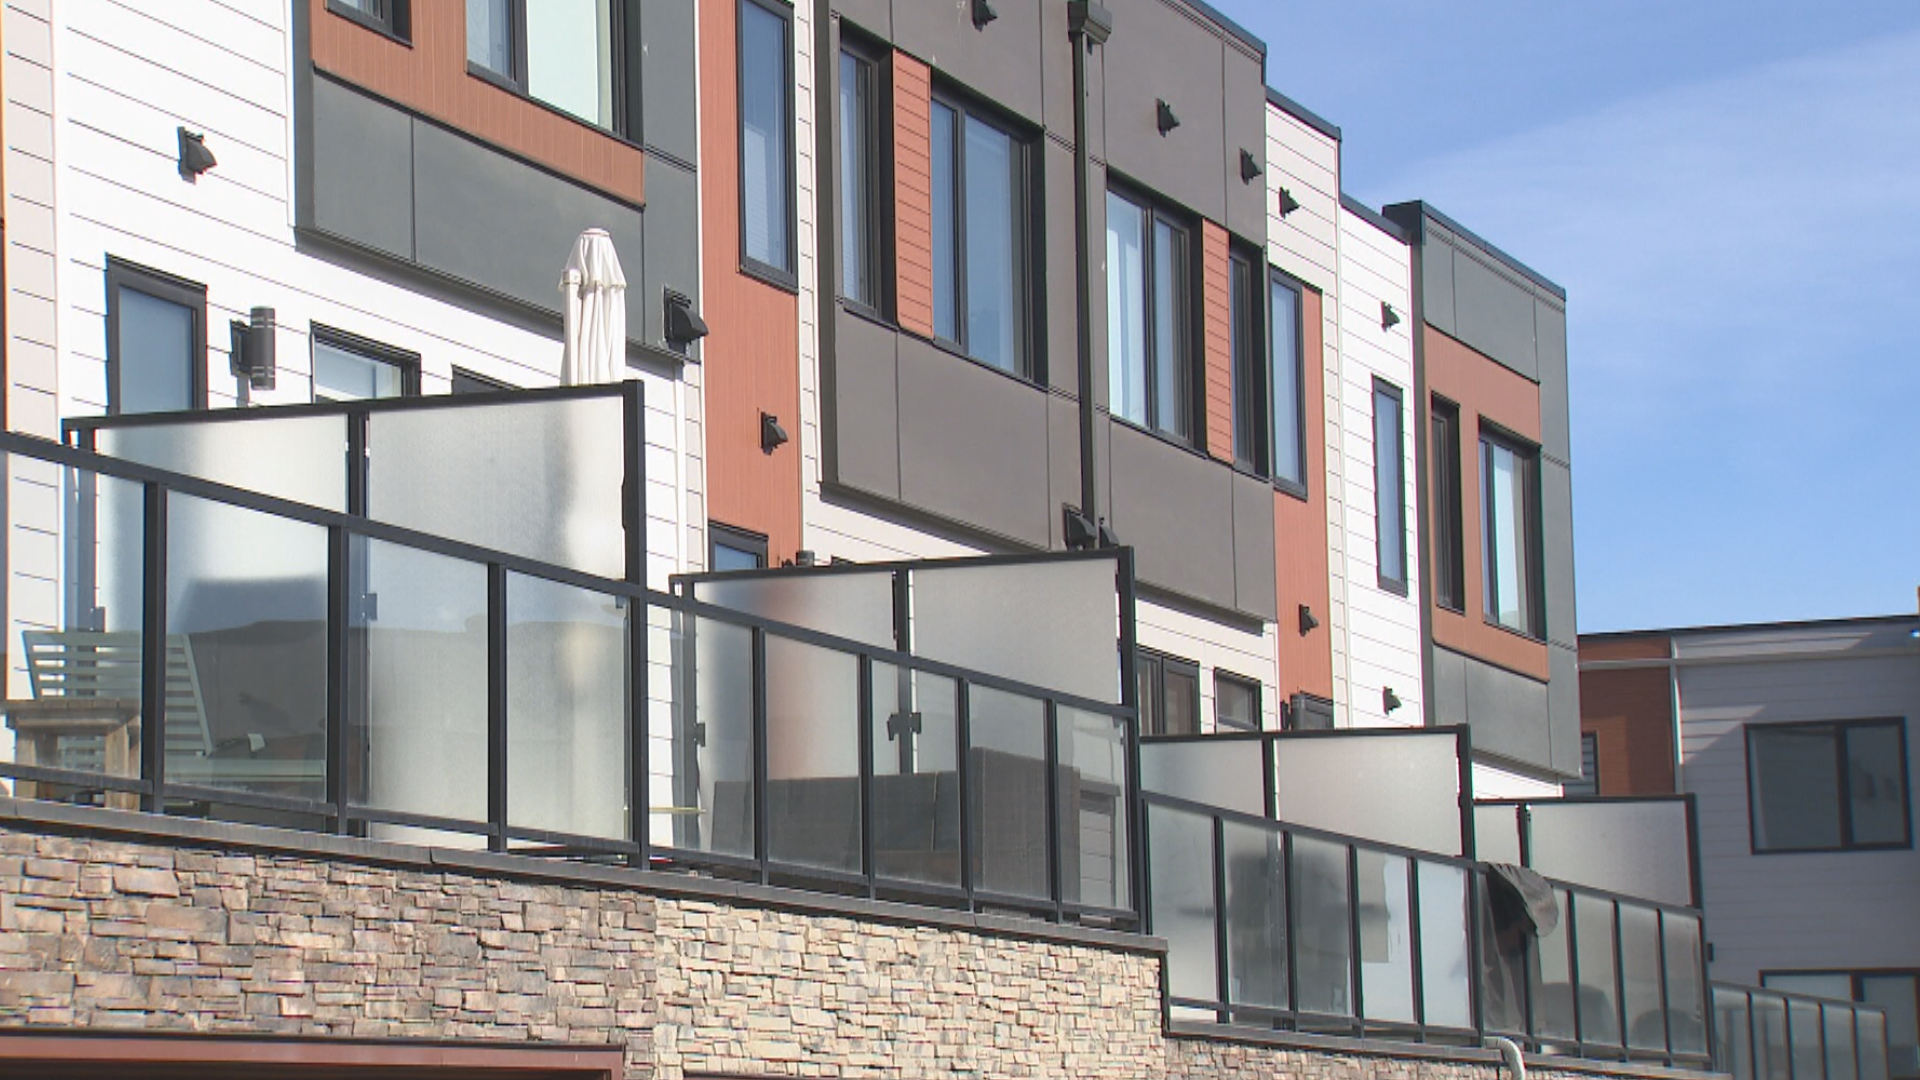 Price of Calgary townhomes growing fastest in Canada: report